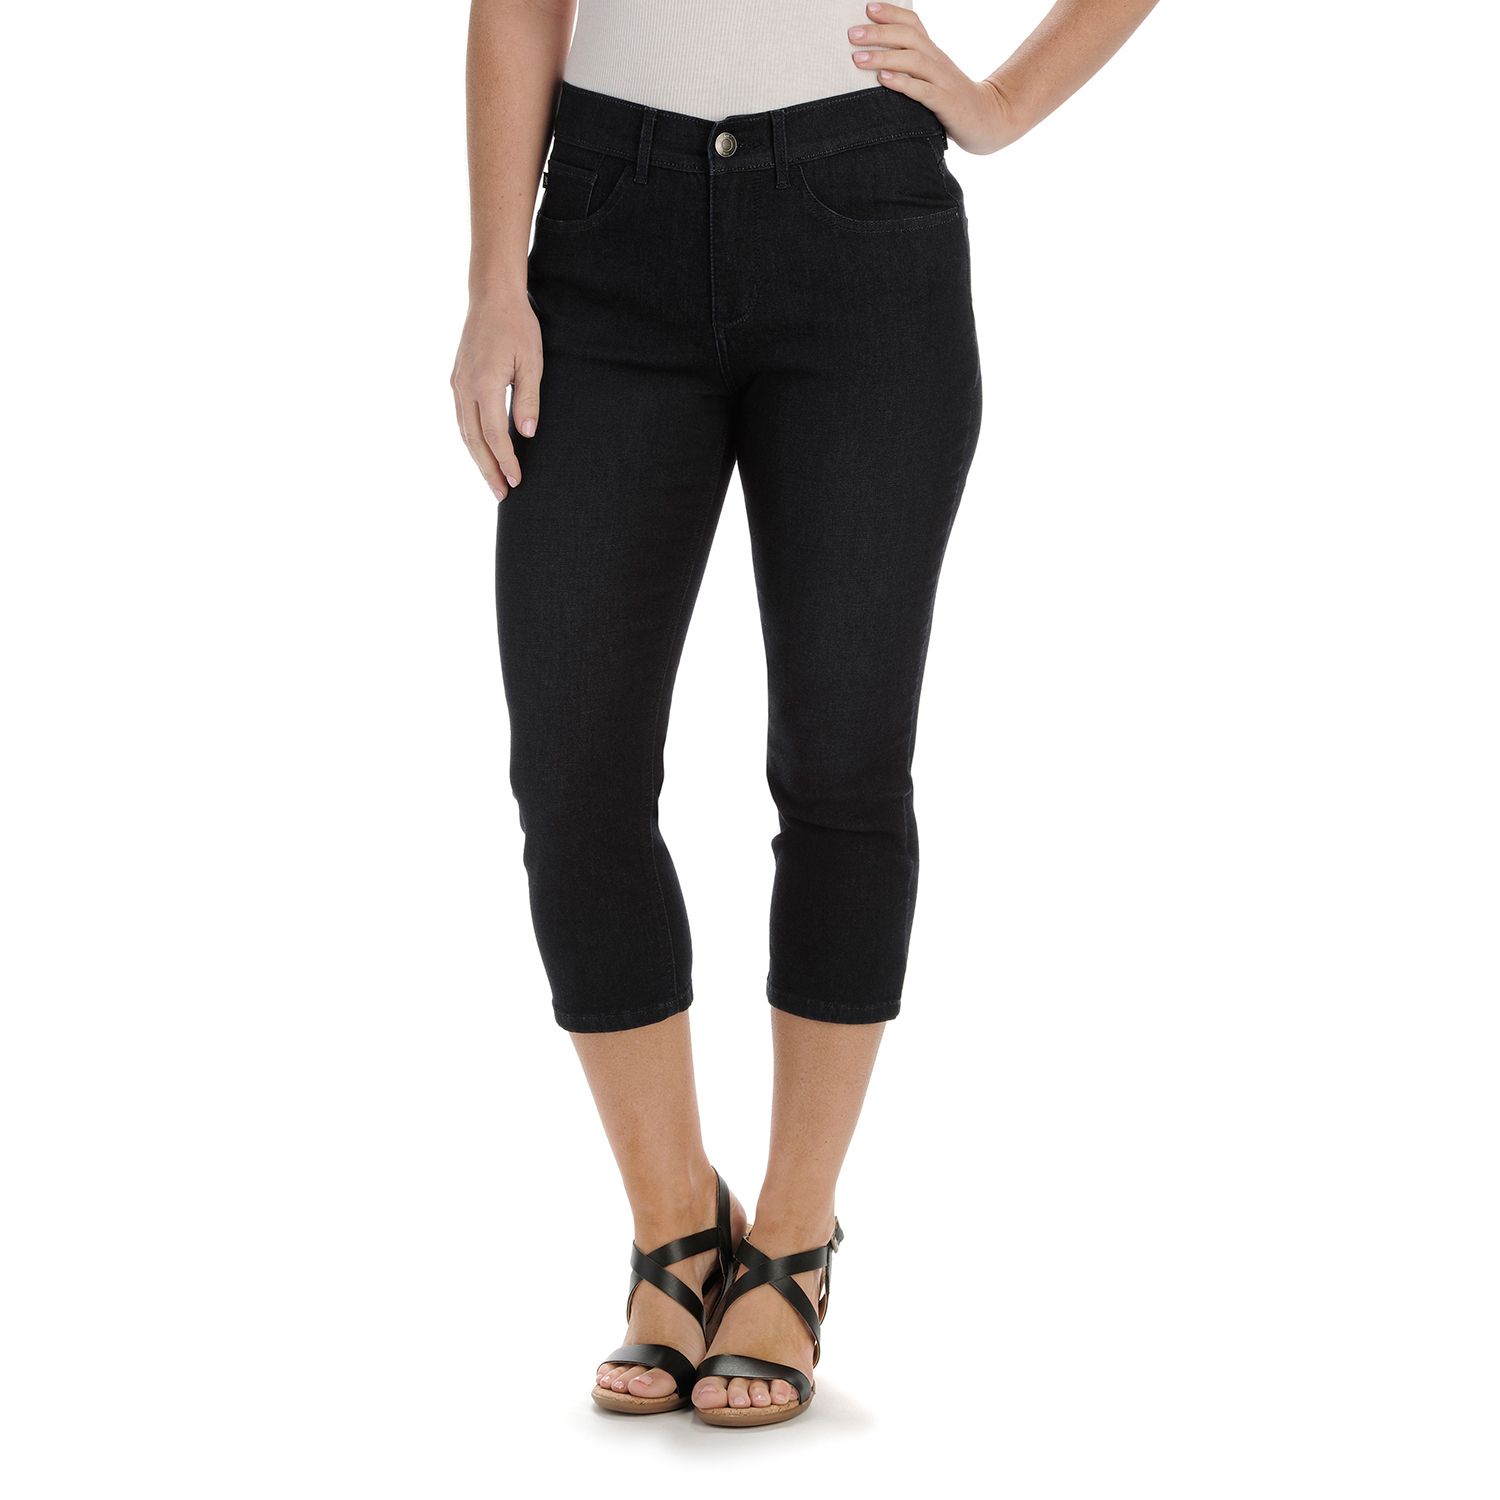 Women's Lee Frenchie Easy Fit Capri Jeans